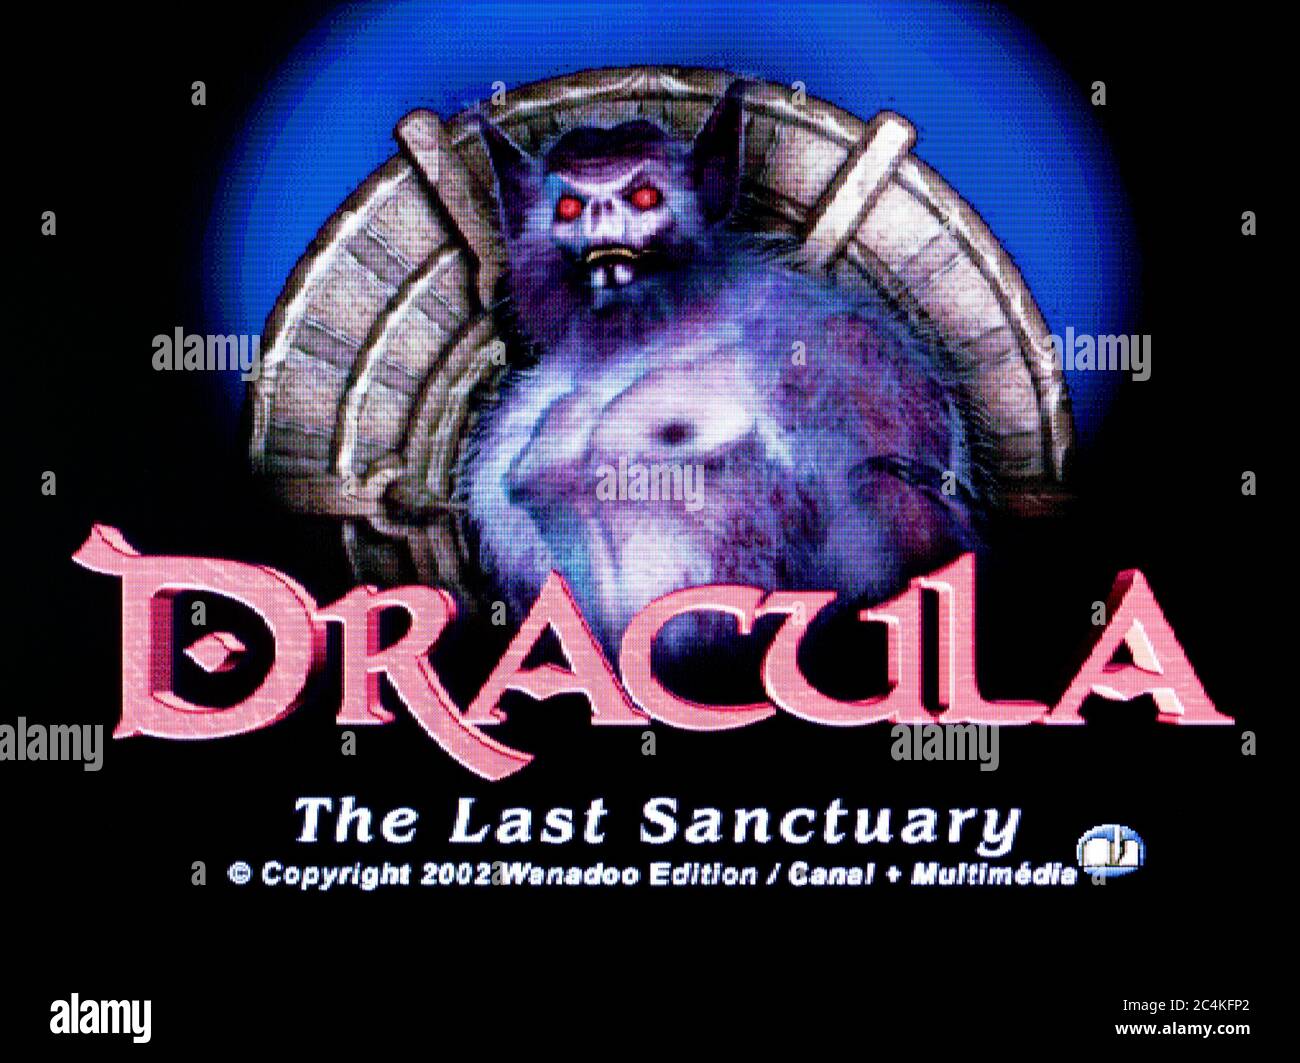 Dracula The Last Sanctuary - Sony Playstation 1 PS1 PSX - Editorial use only Stock Photo